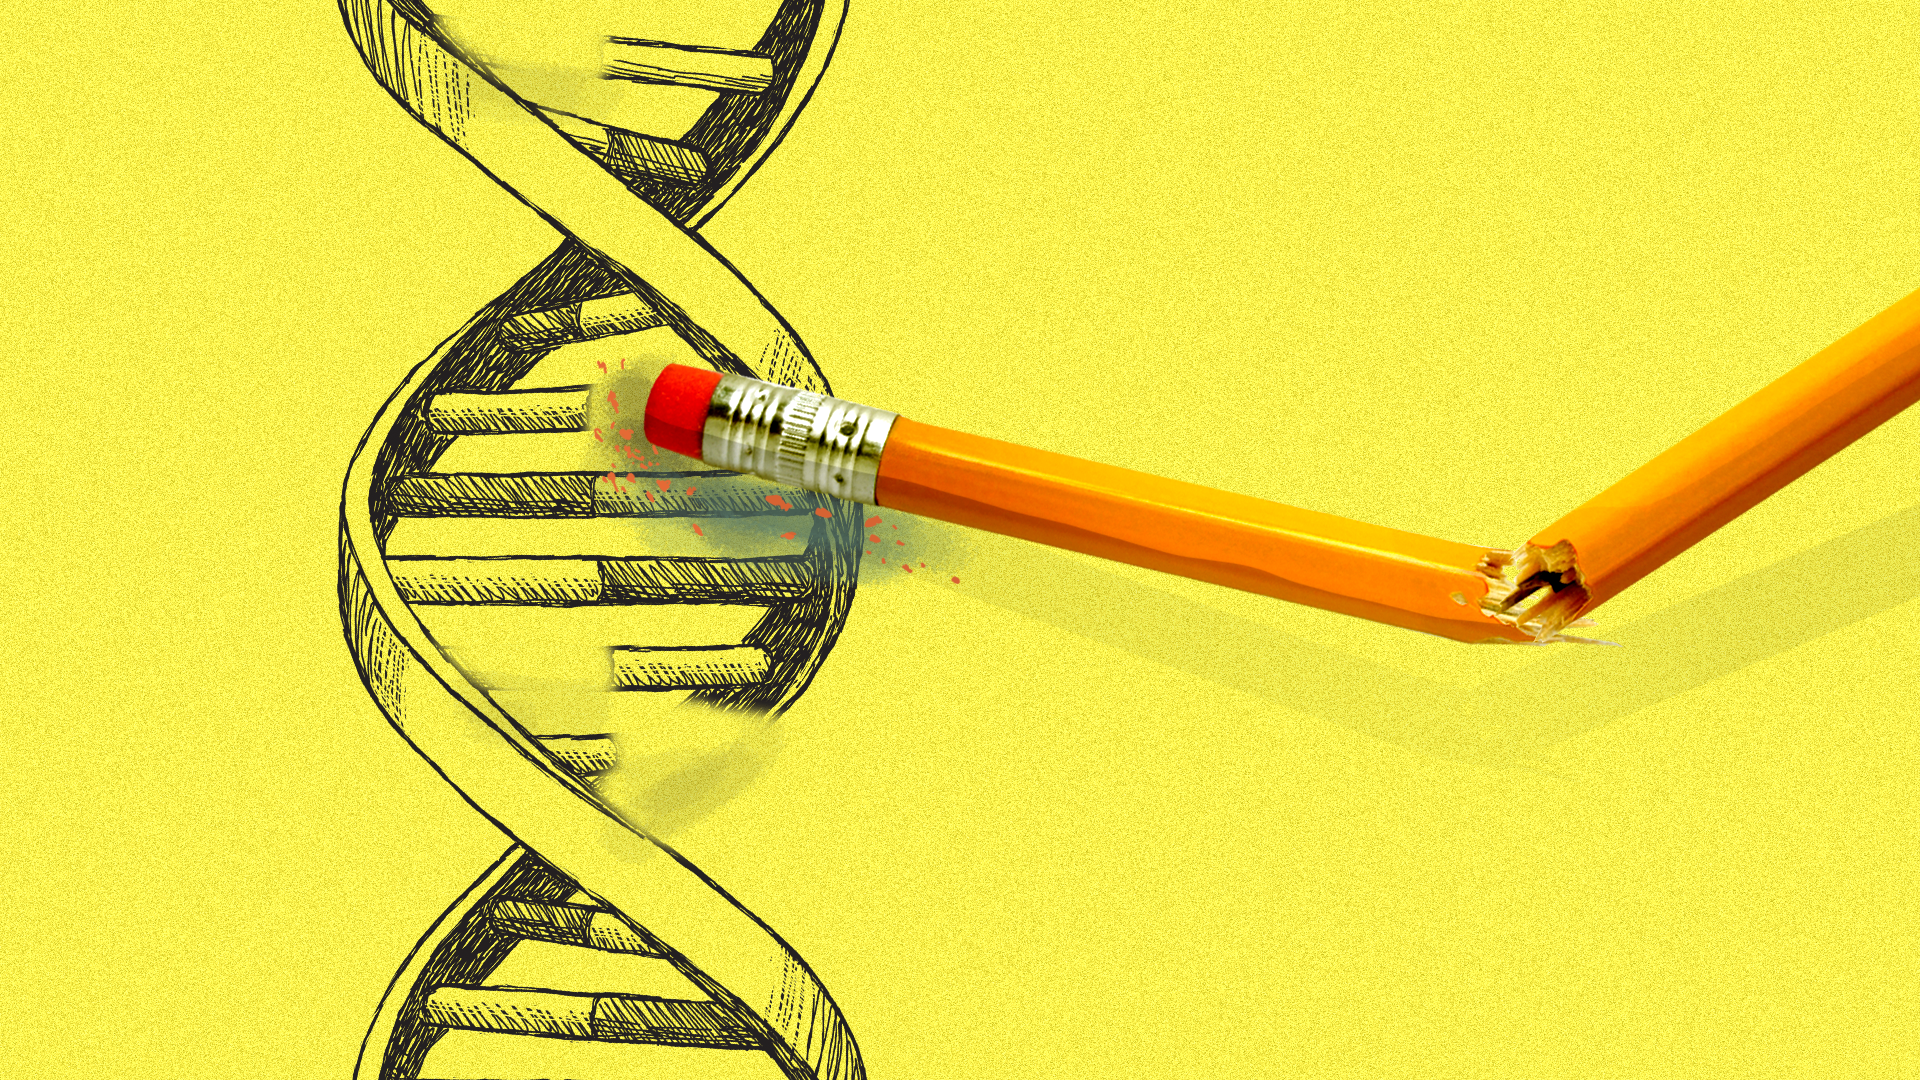 In this illustration, a broken pencil erases a drawing of a DNA double helix.